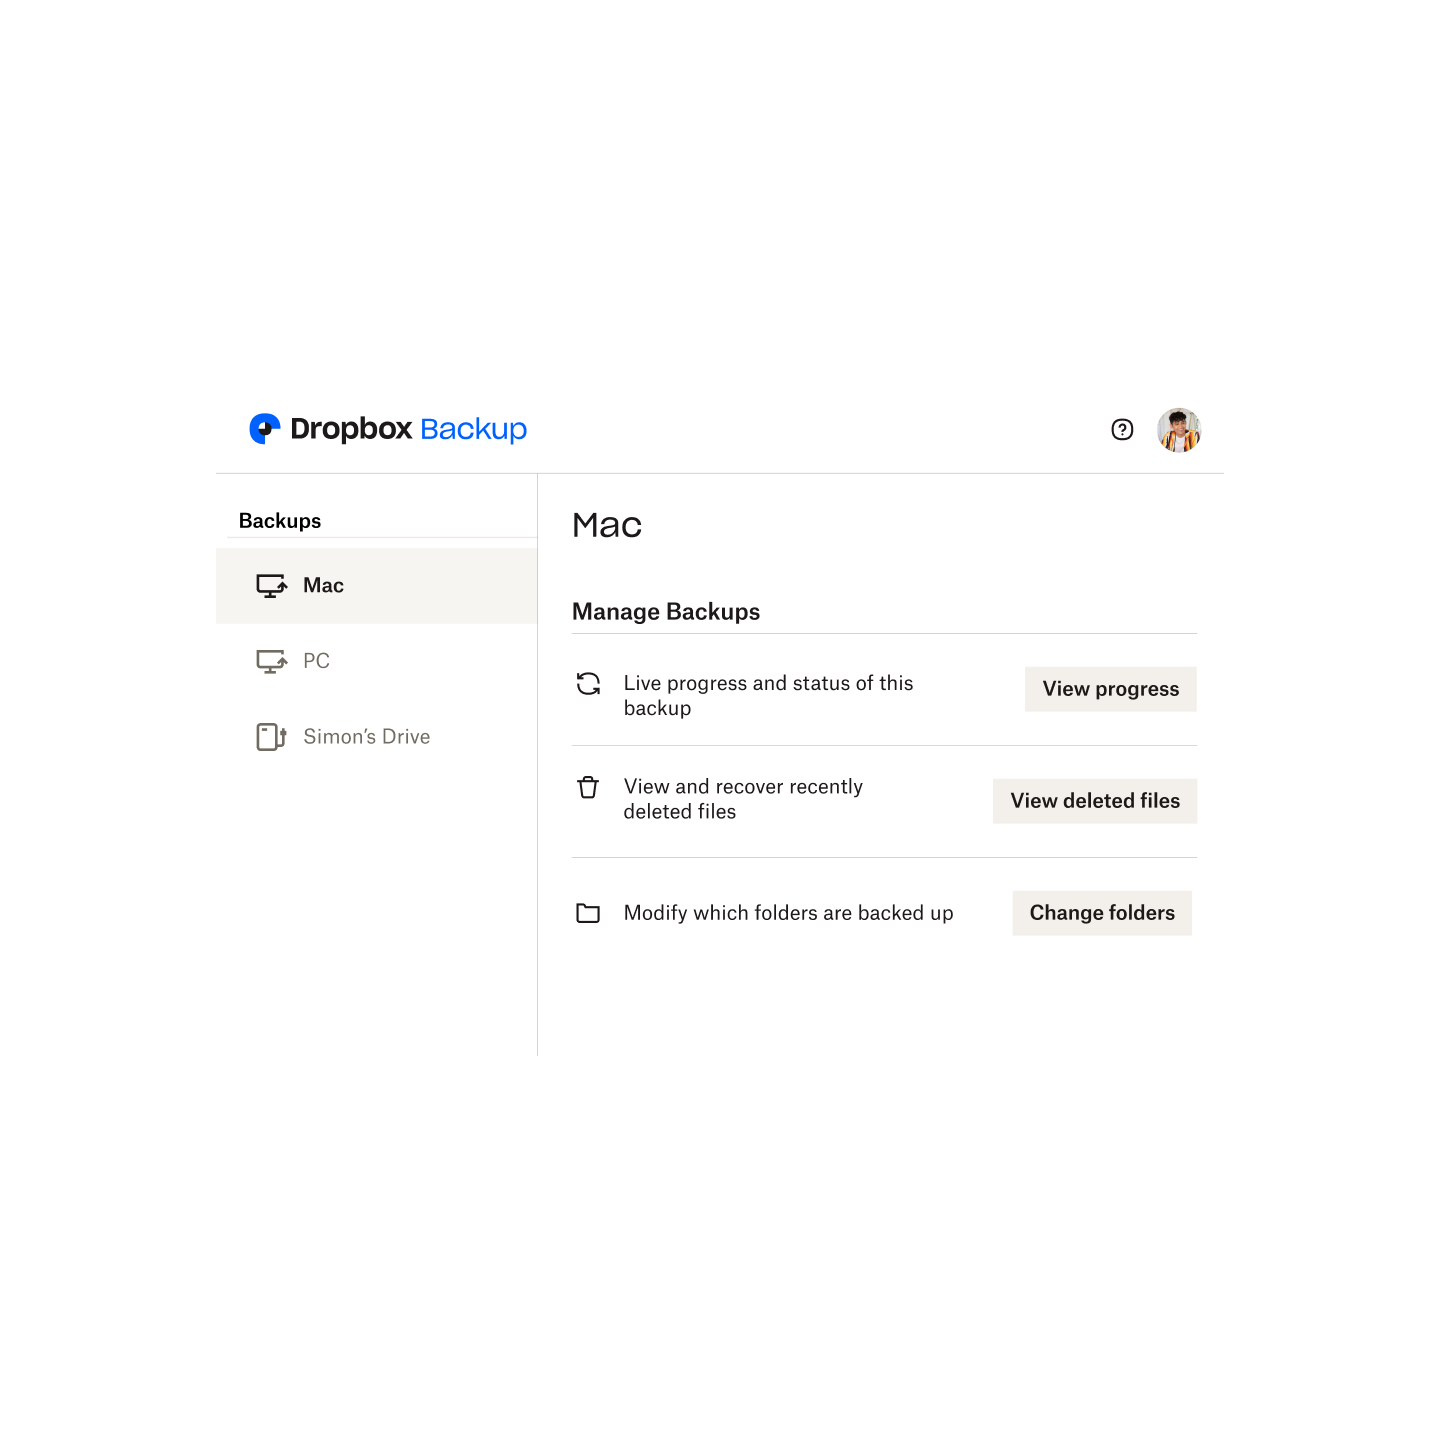 The menu for Dropbox Backup management that includes the ability to view backup status, view and recover deleted files and to change which folders are backed up